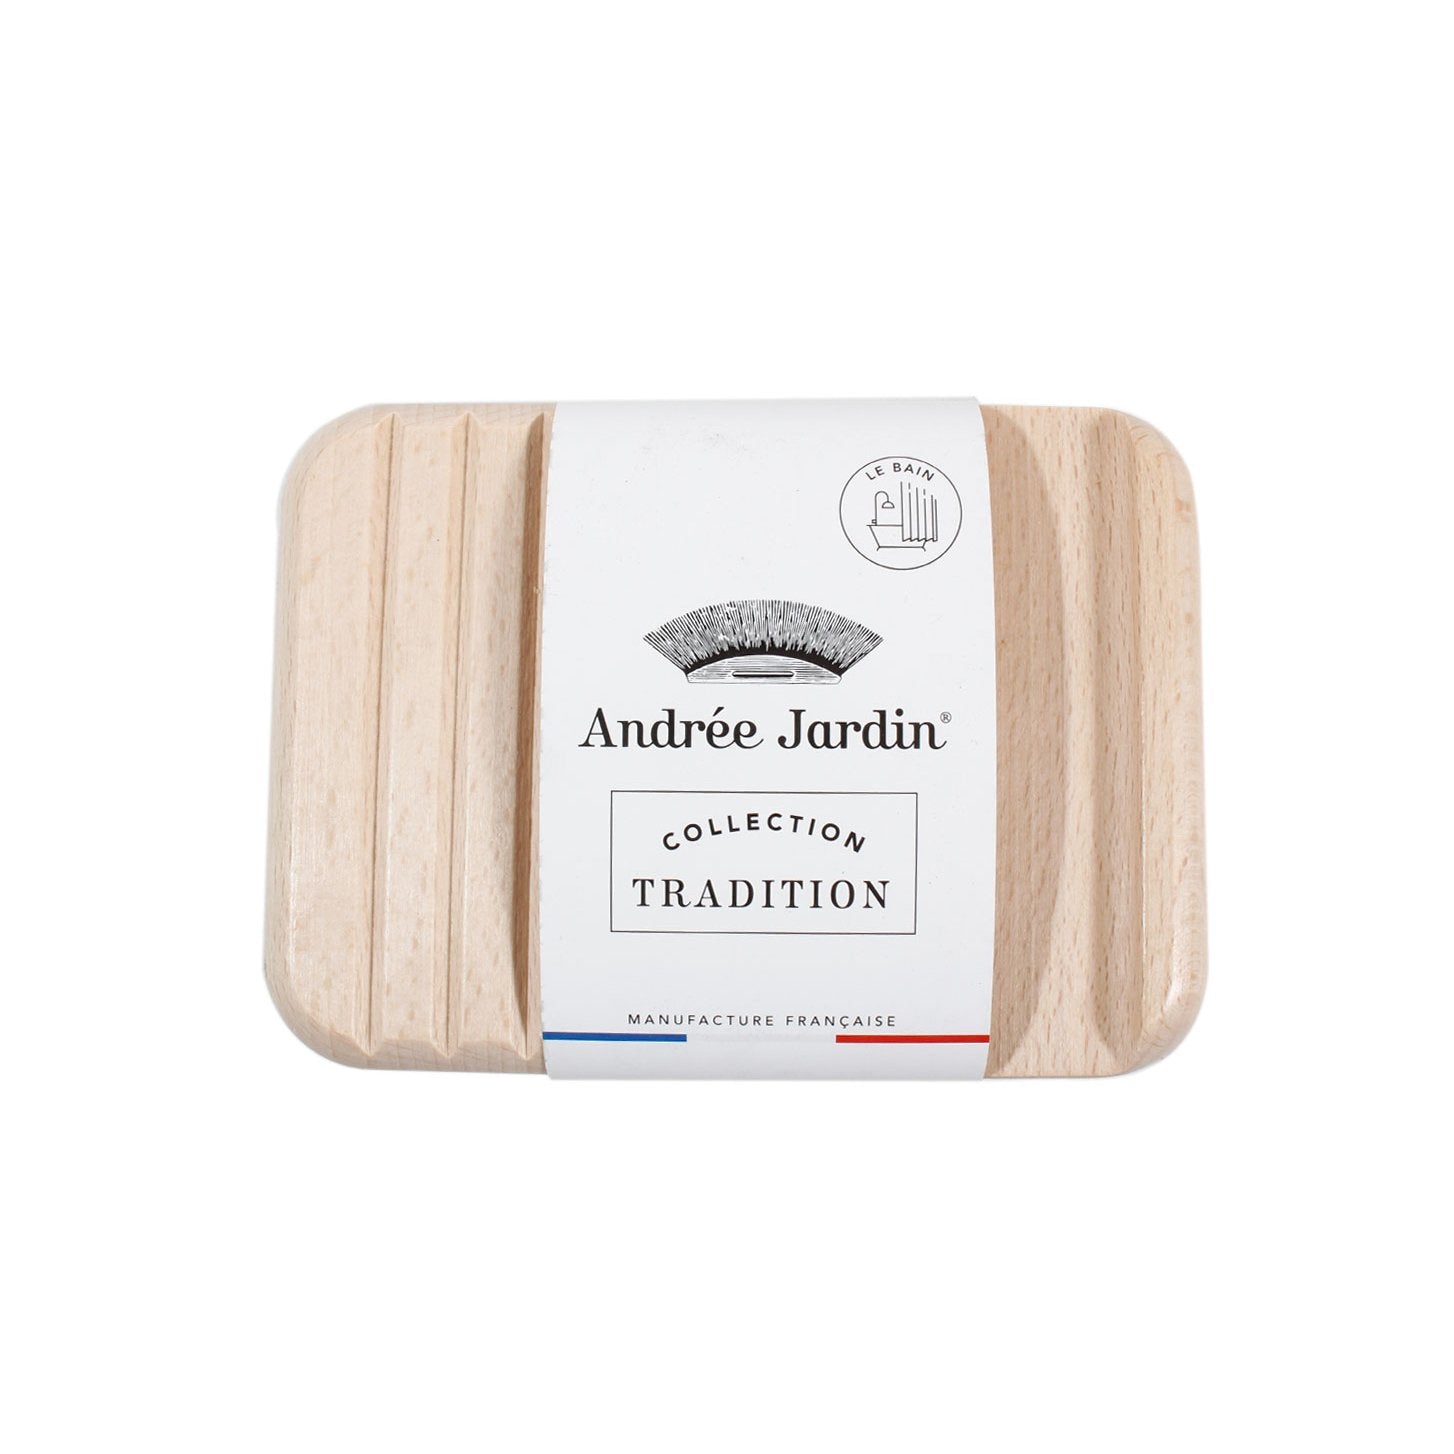 Andrée Jardin Tradition Beech Wood Soap Holder Andrée Jardin andree-jardin-tradition-beech-wood-soap-holder-set-of-2 - French Dry Goods